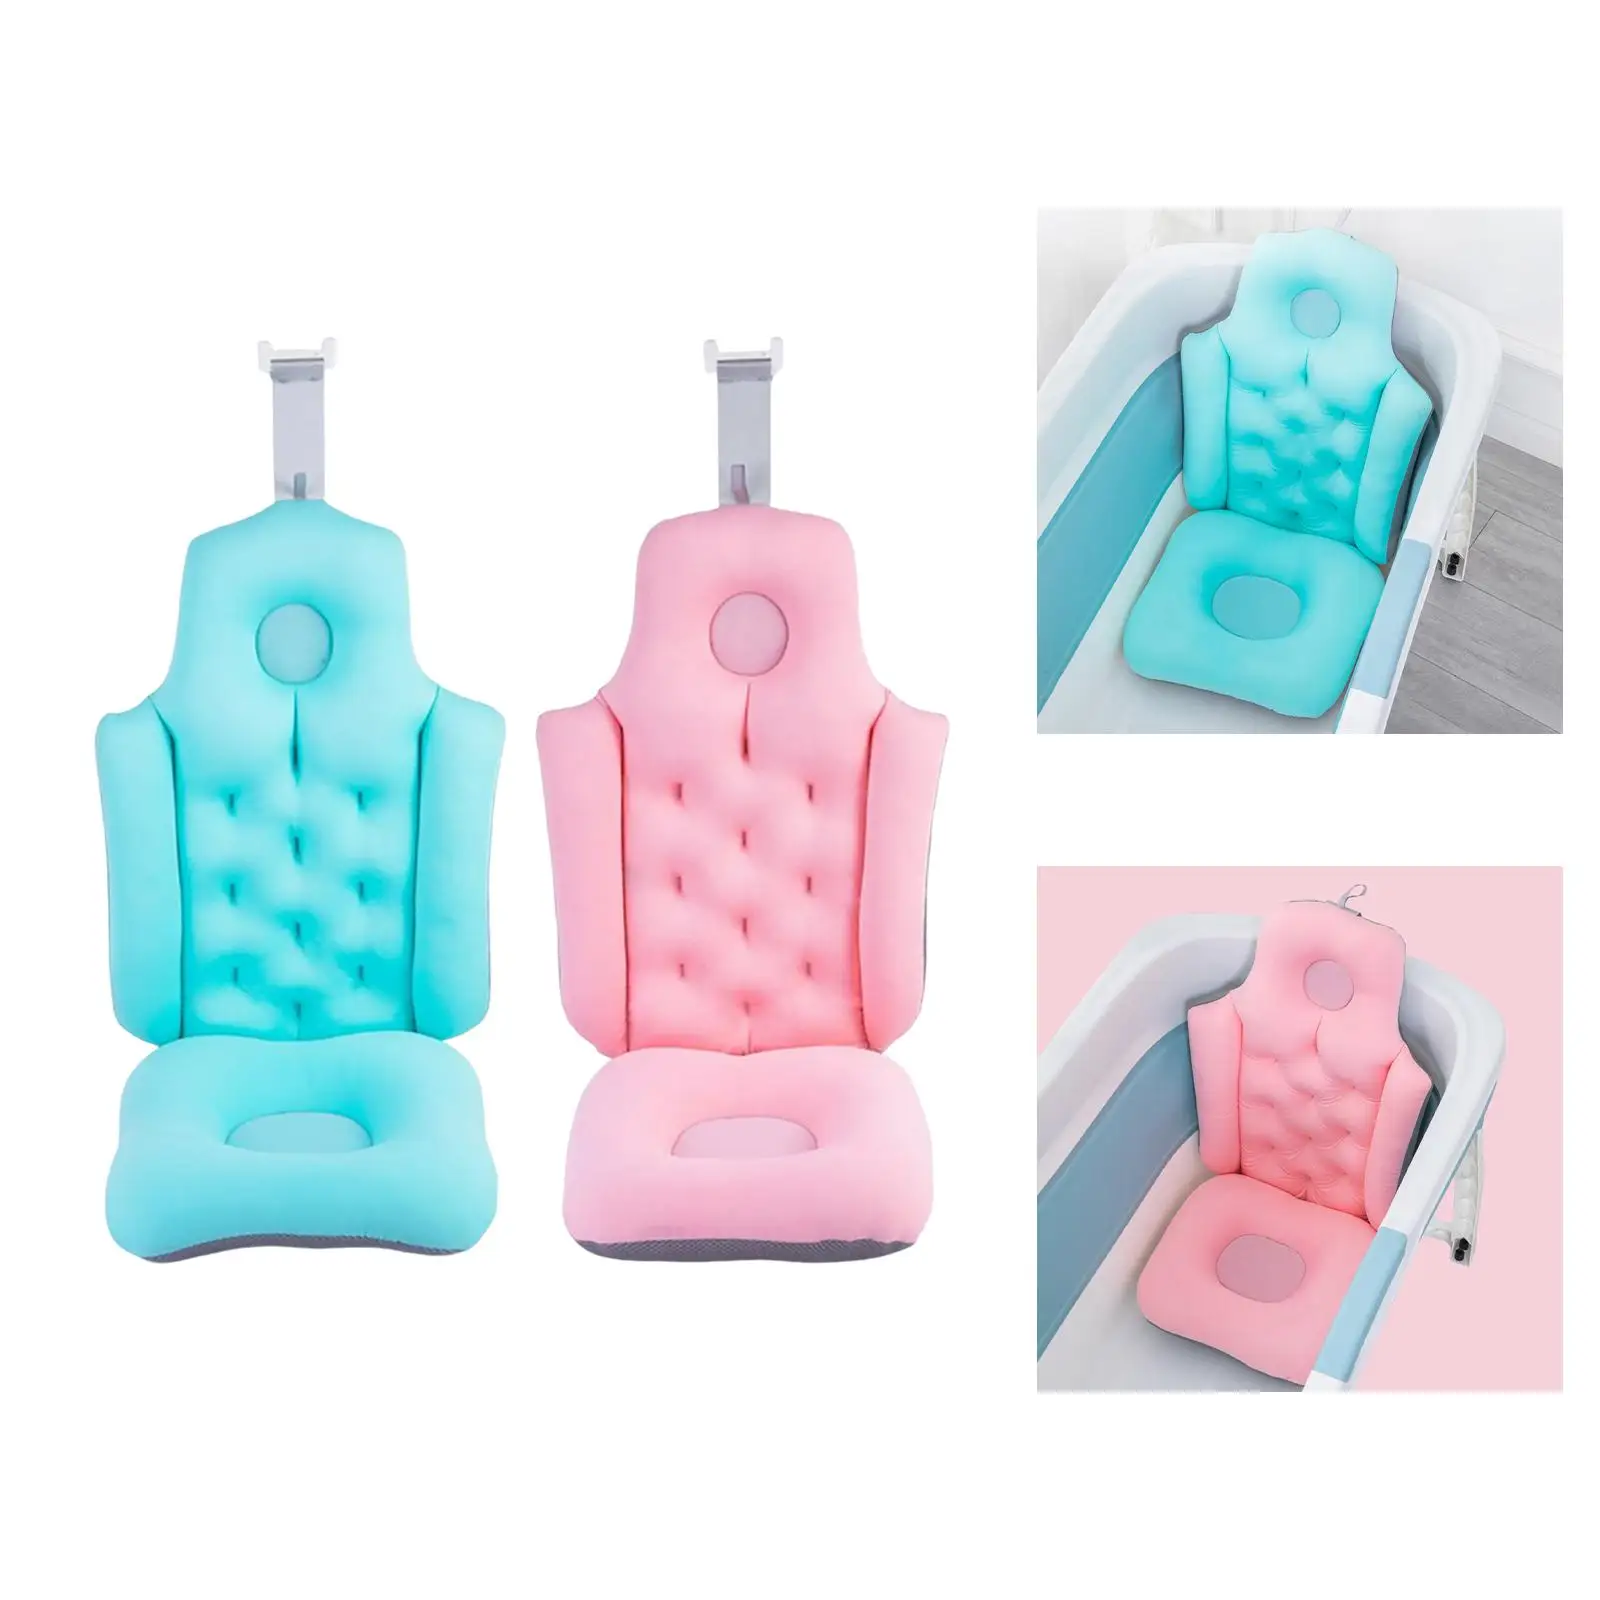 Full Body Bath Pillow Accessories Bath Cushion Waterproof Neck Support Breathable Shower Pillow SPA Bathtub Pillow for Tub